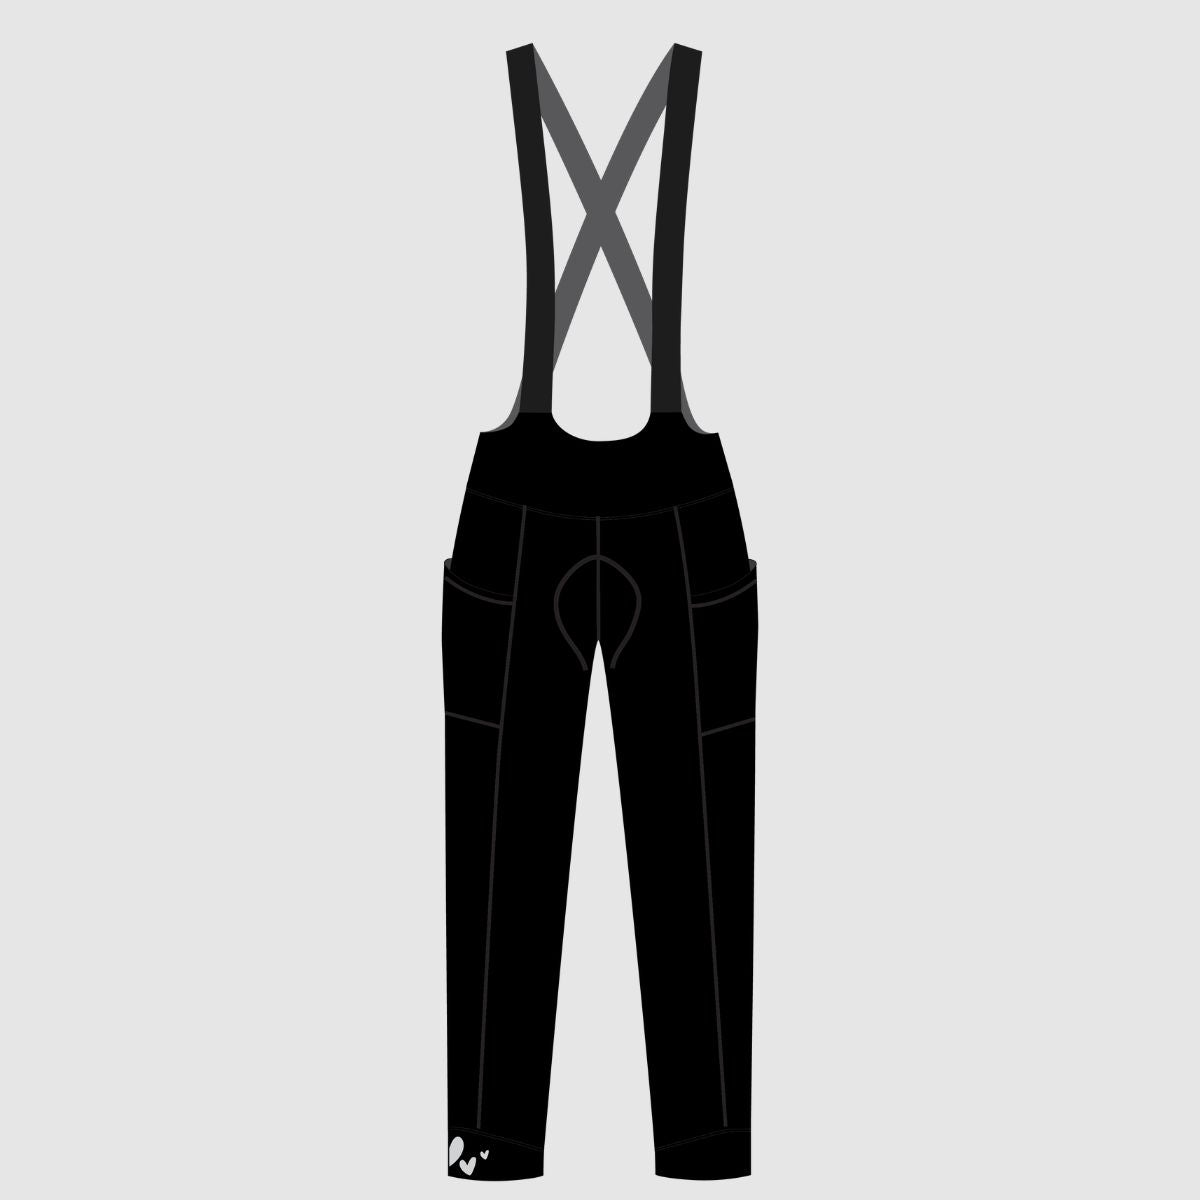 Tech drawing of Womens cycling bib tights in black front view